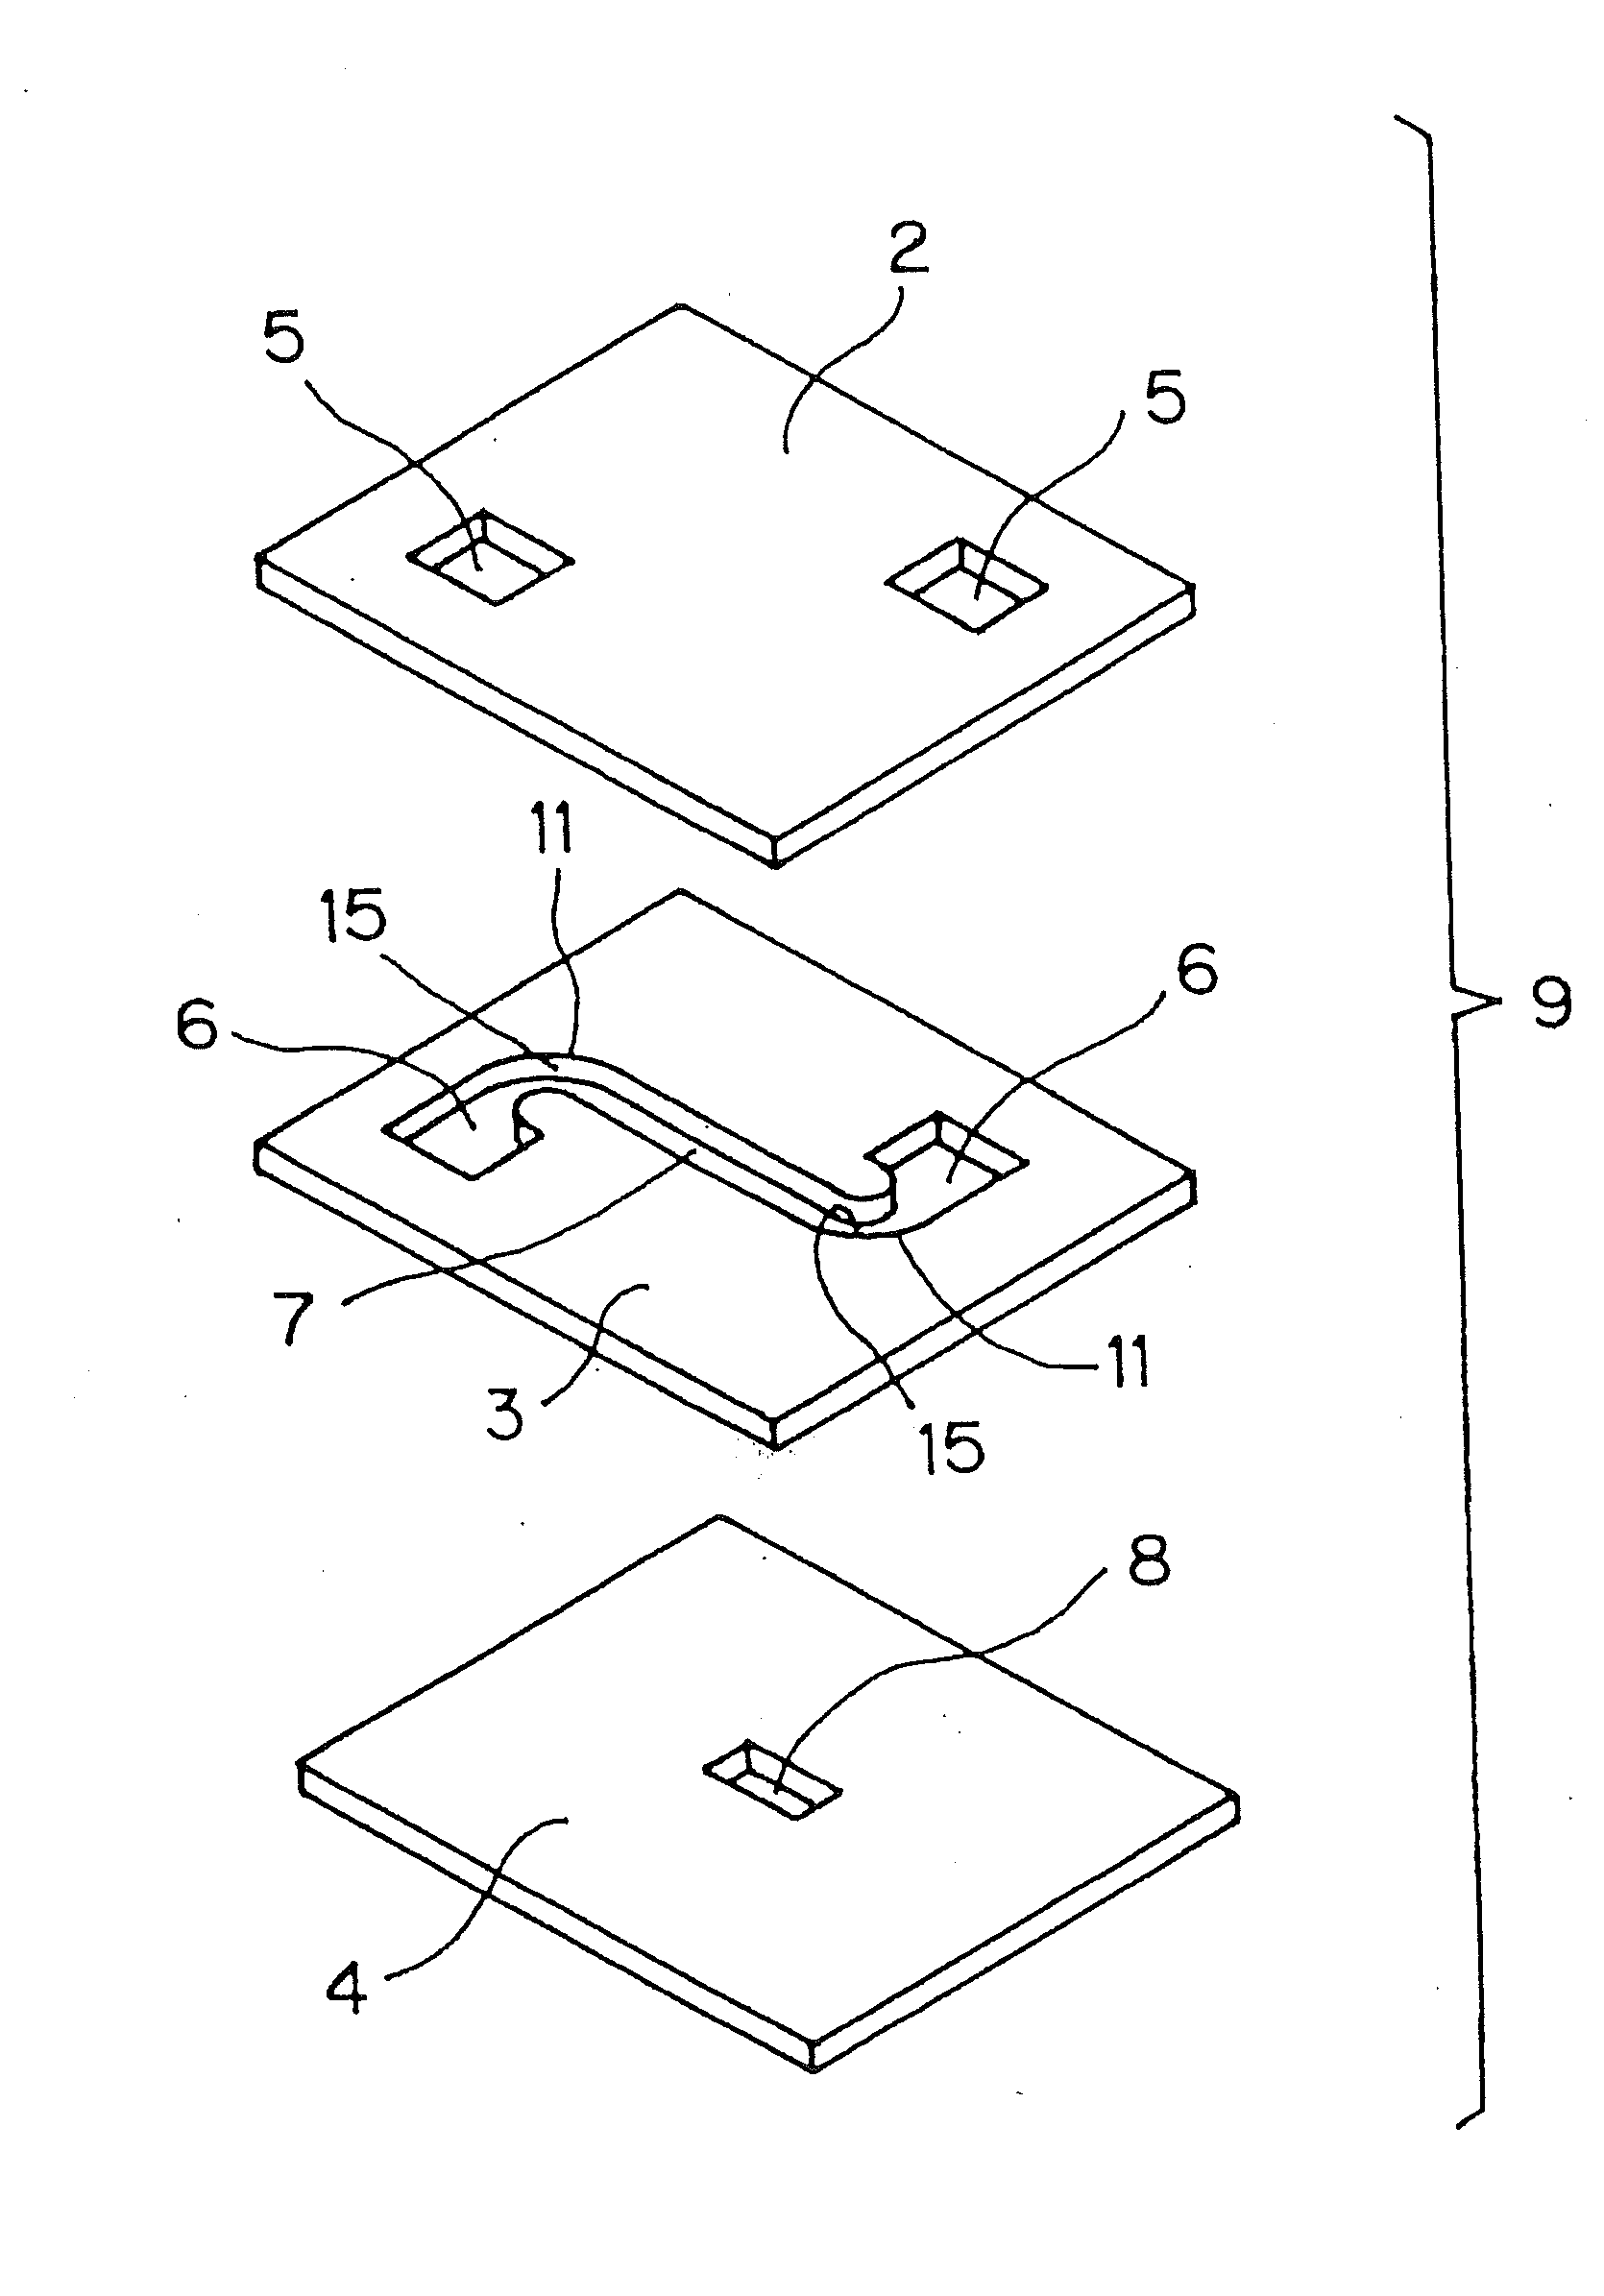 Sheet for Shielding Soft X-Rays in a Remover Using Soft X-Rays that Removes Static Charges and a Method of Manufacturing It